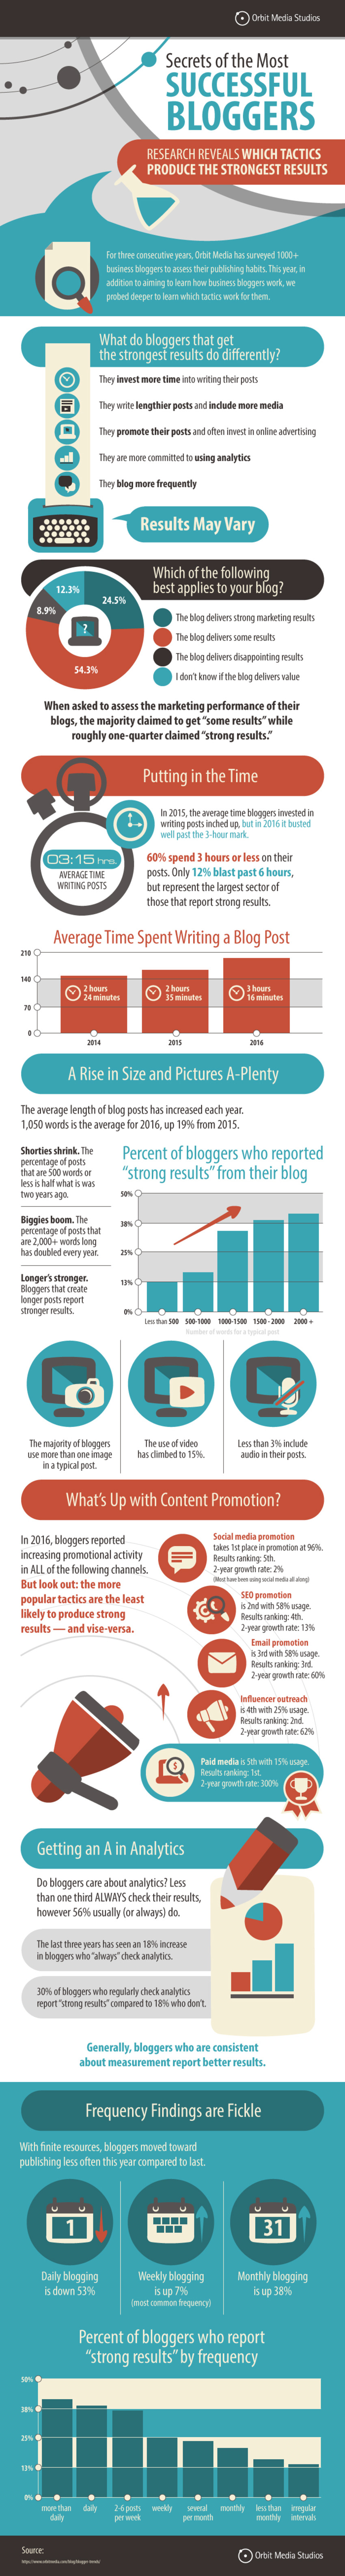 Which Blogging Tactics Produce the Strongest Results? [Infographic] - Social Media Today | The MarTech Digest | Scoop.it